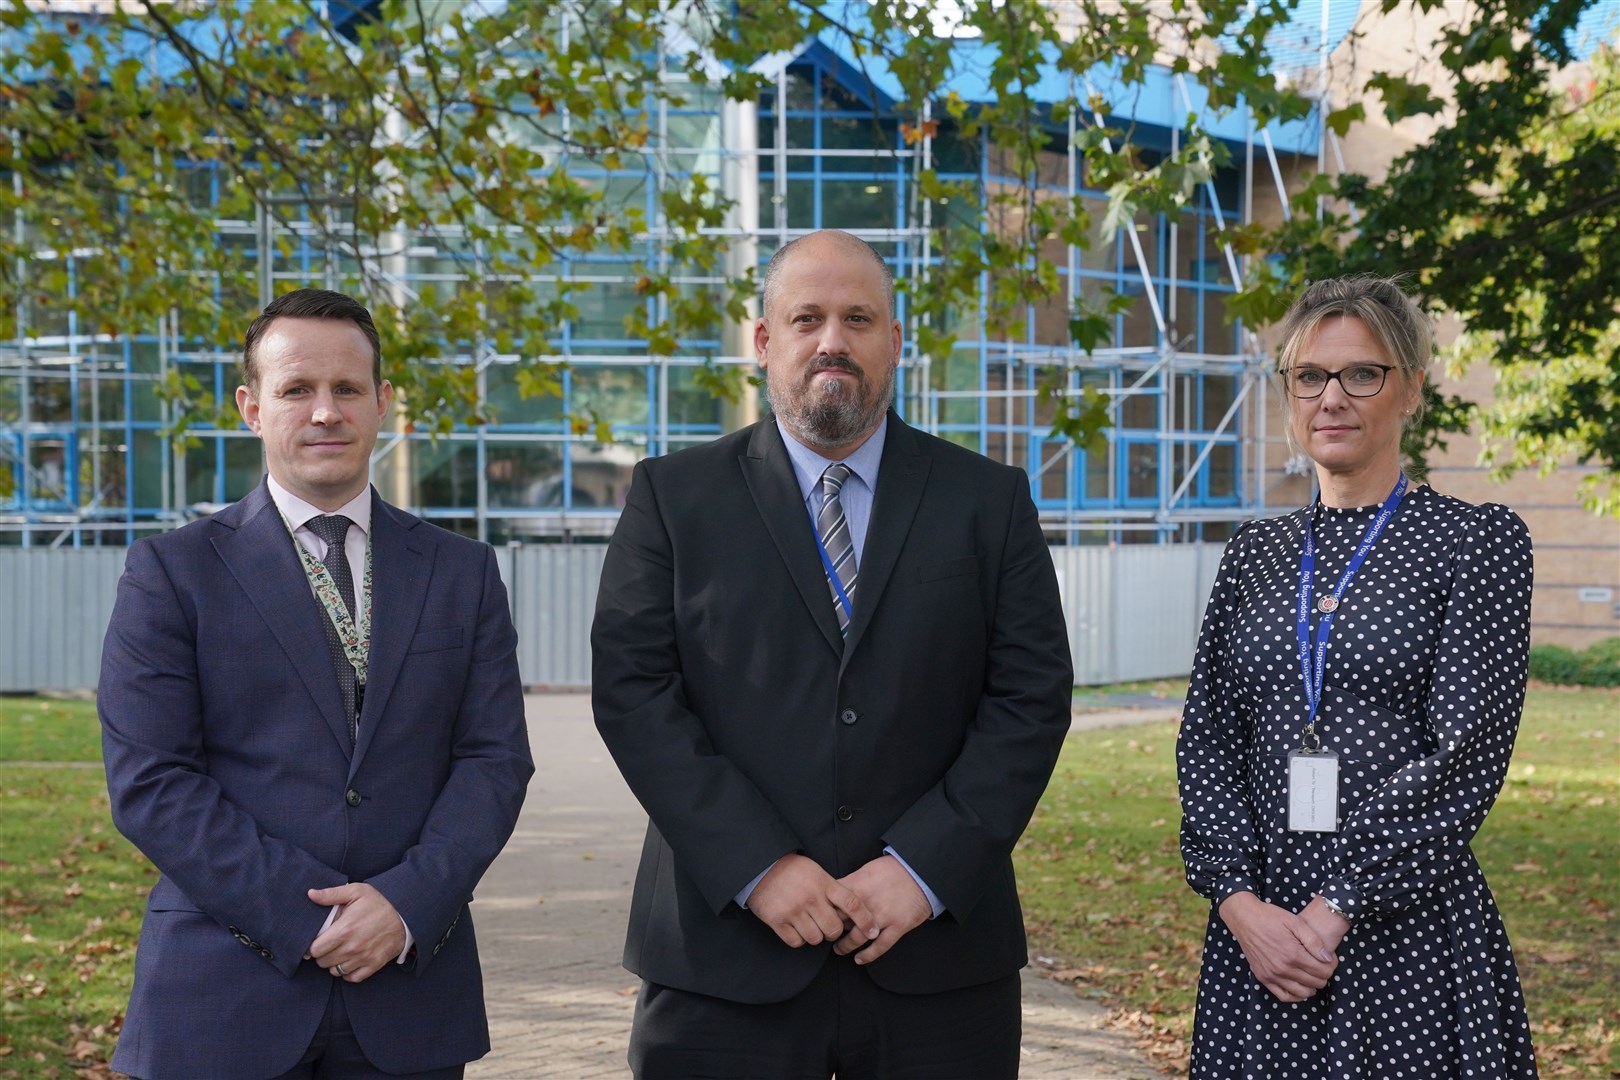 From left, Detective Sergeant Ben Rushmere, Detective Constable Steven Tilley and Detective Constable Hayley Langmead, outside Basildon Combined Court in Essex, where Jay Lang has been sentenced to 21 years in prison